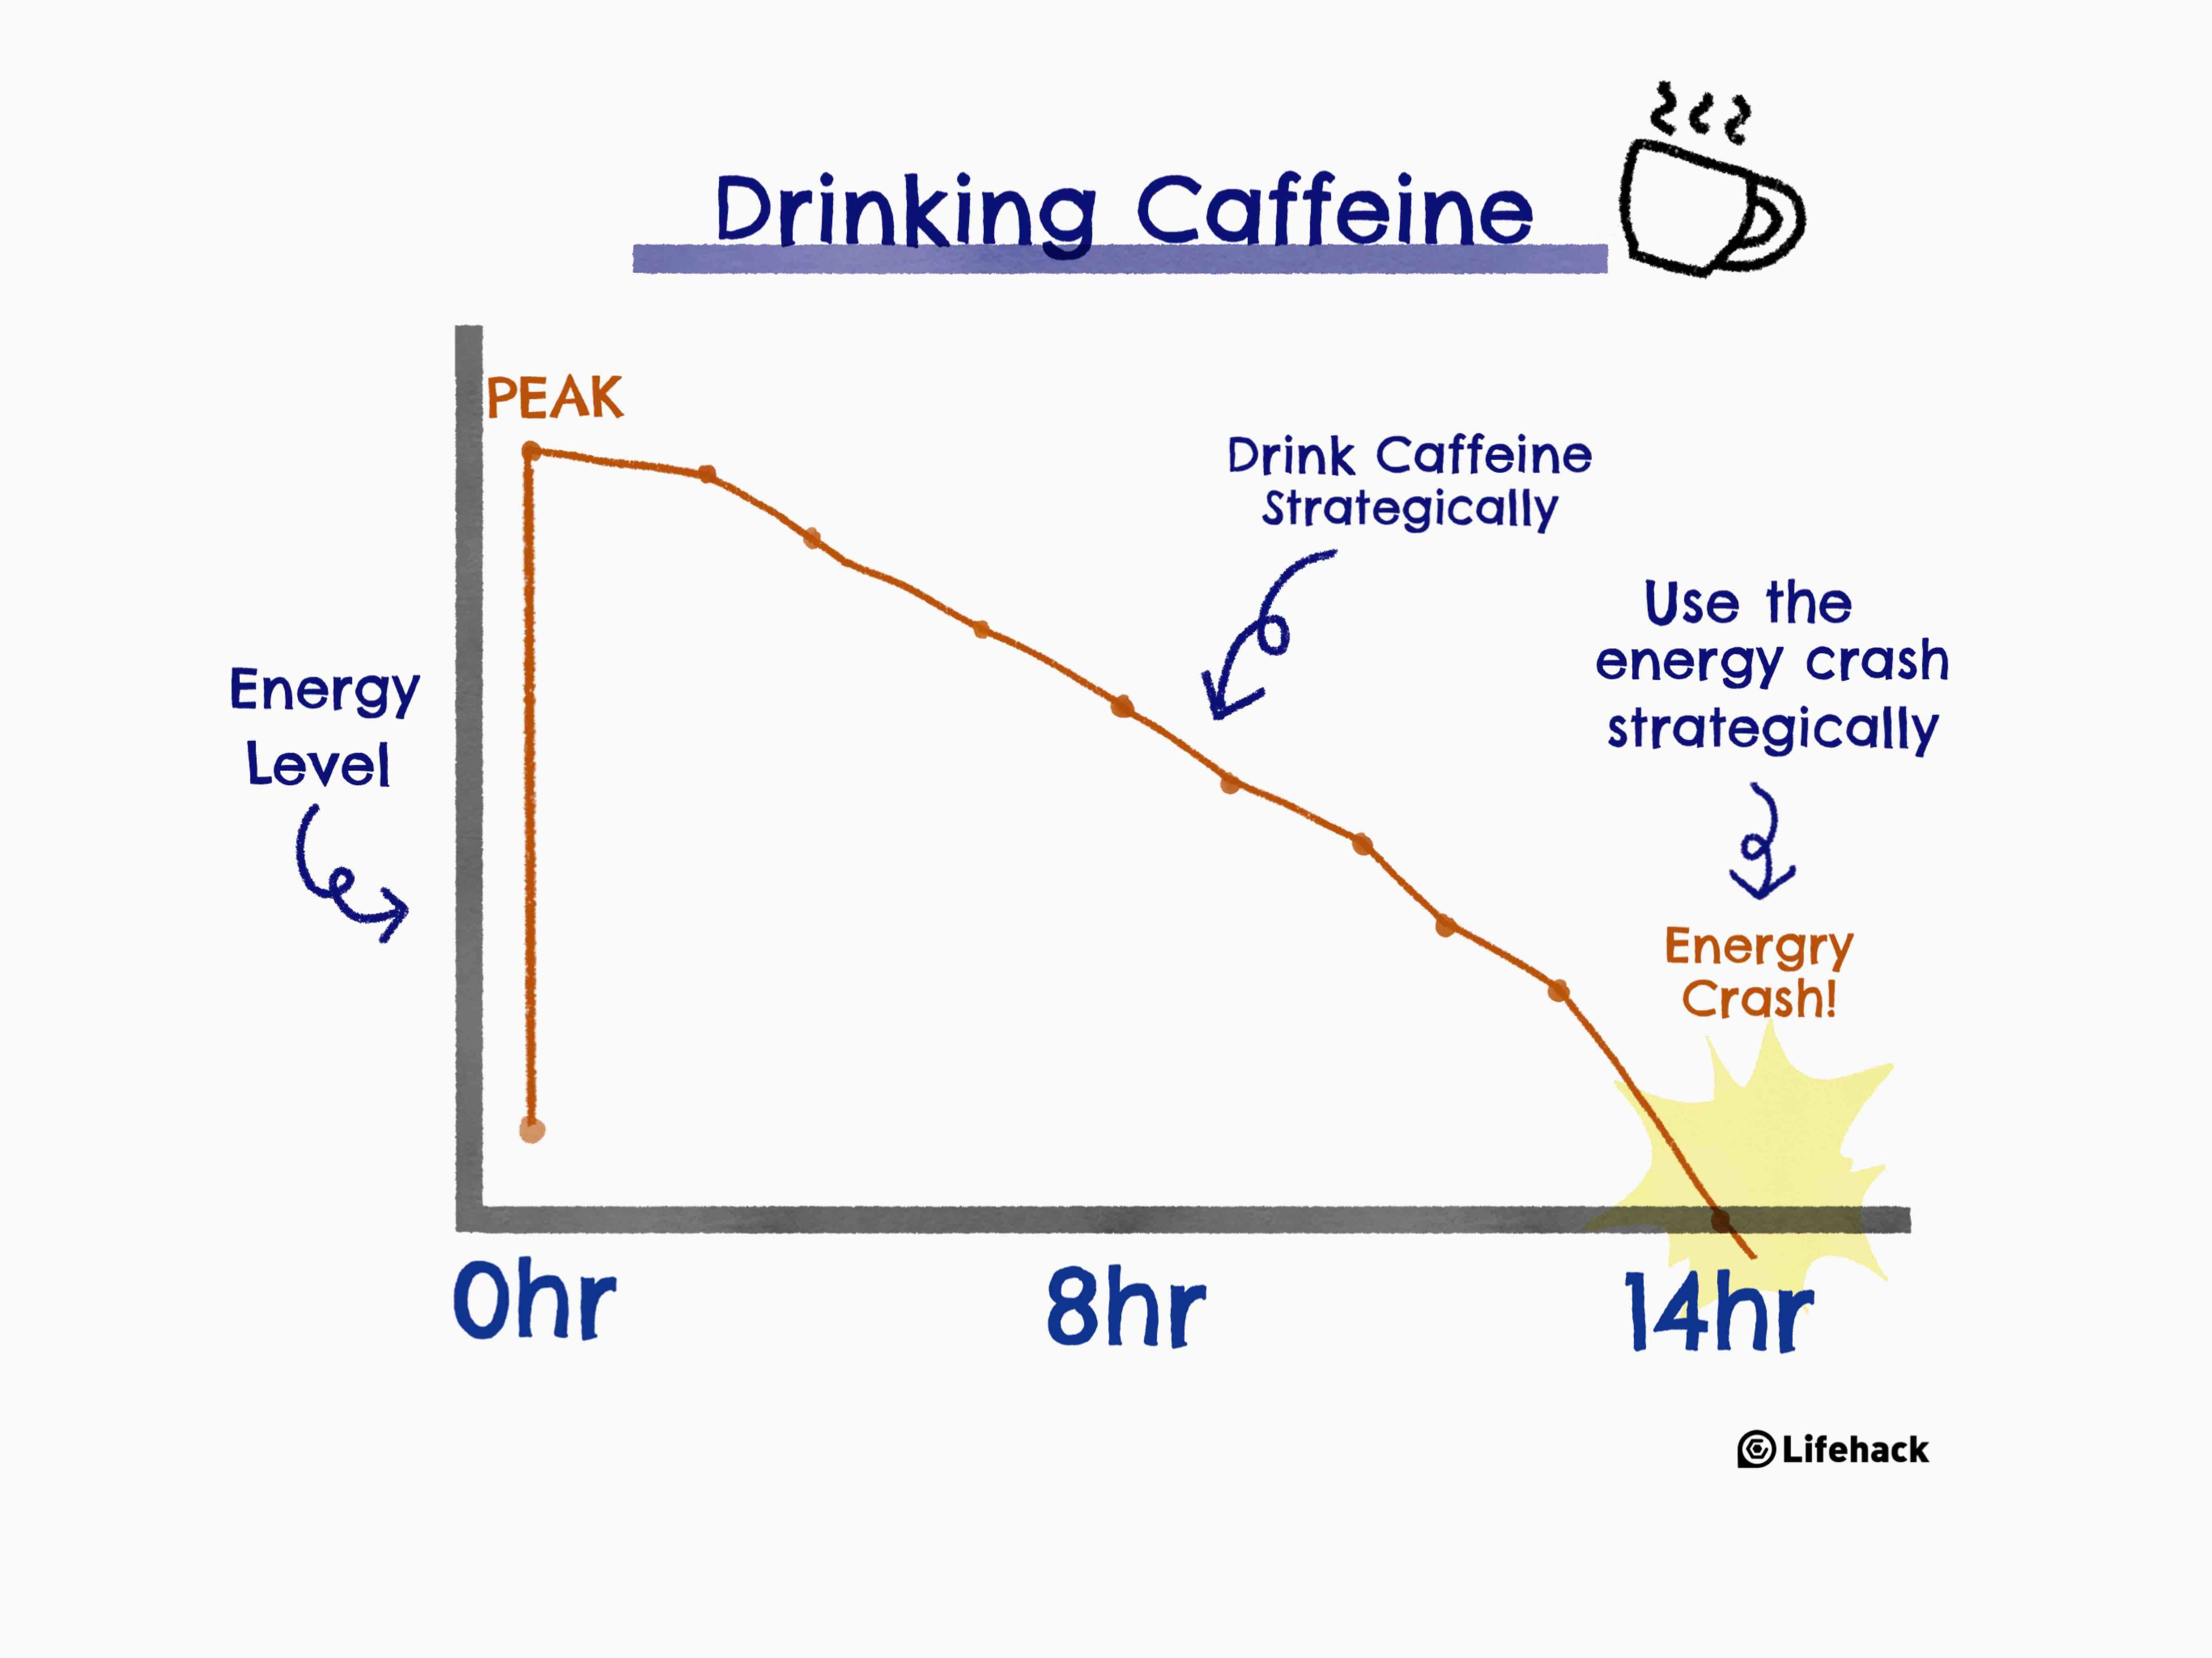 How to Drink Caffeine With Strategy to Boost Your Productivity